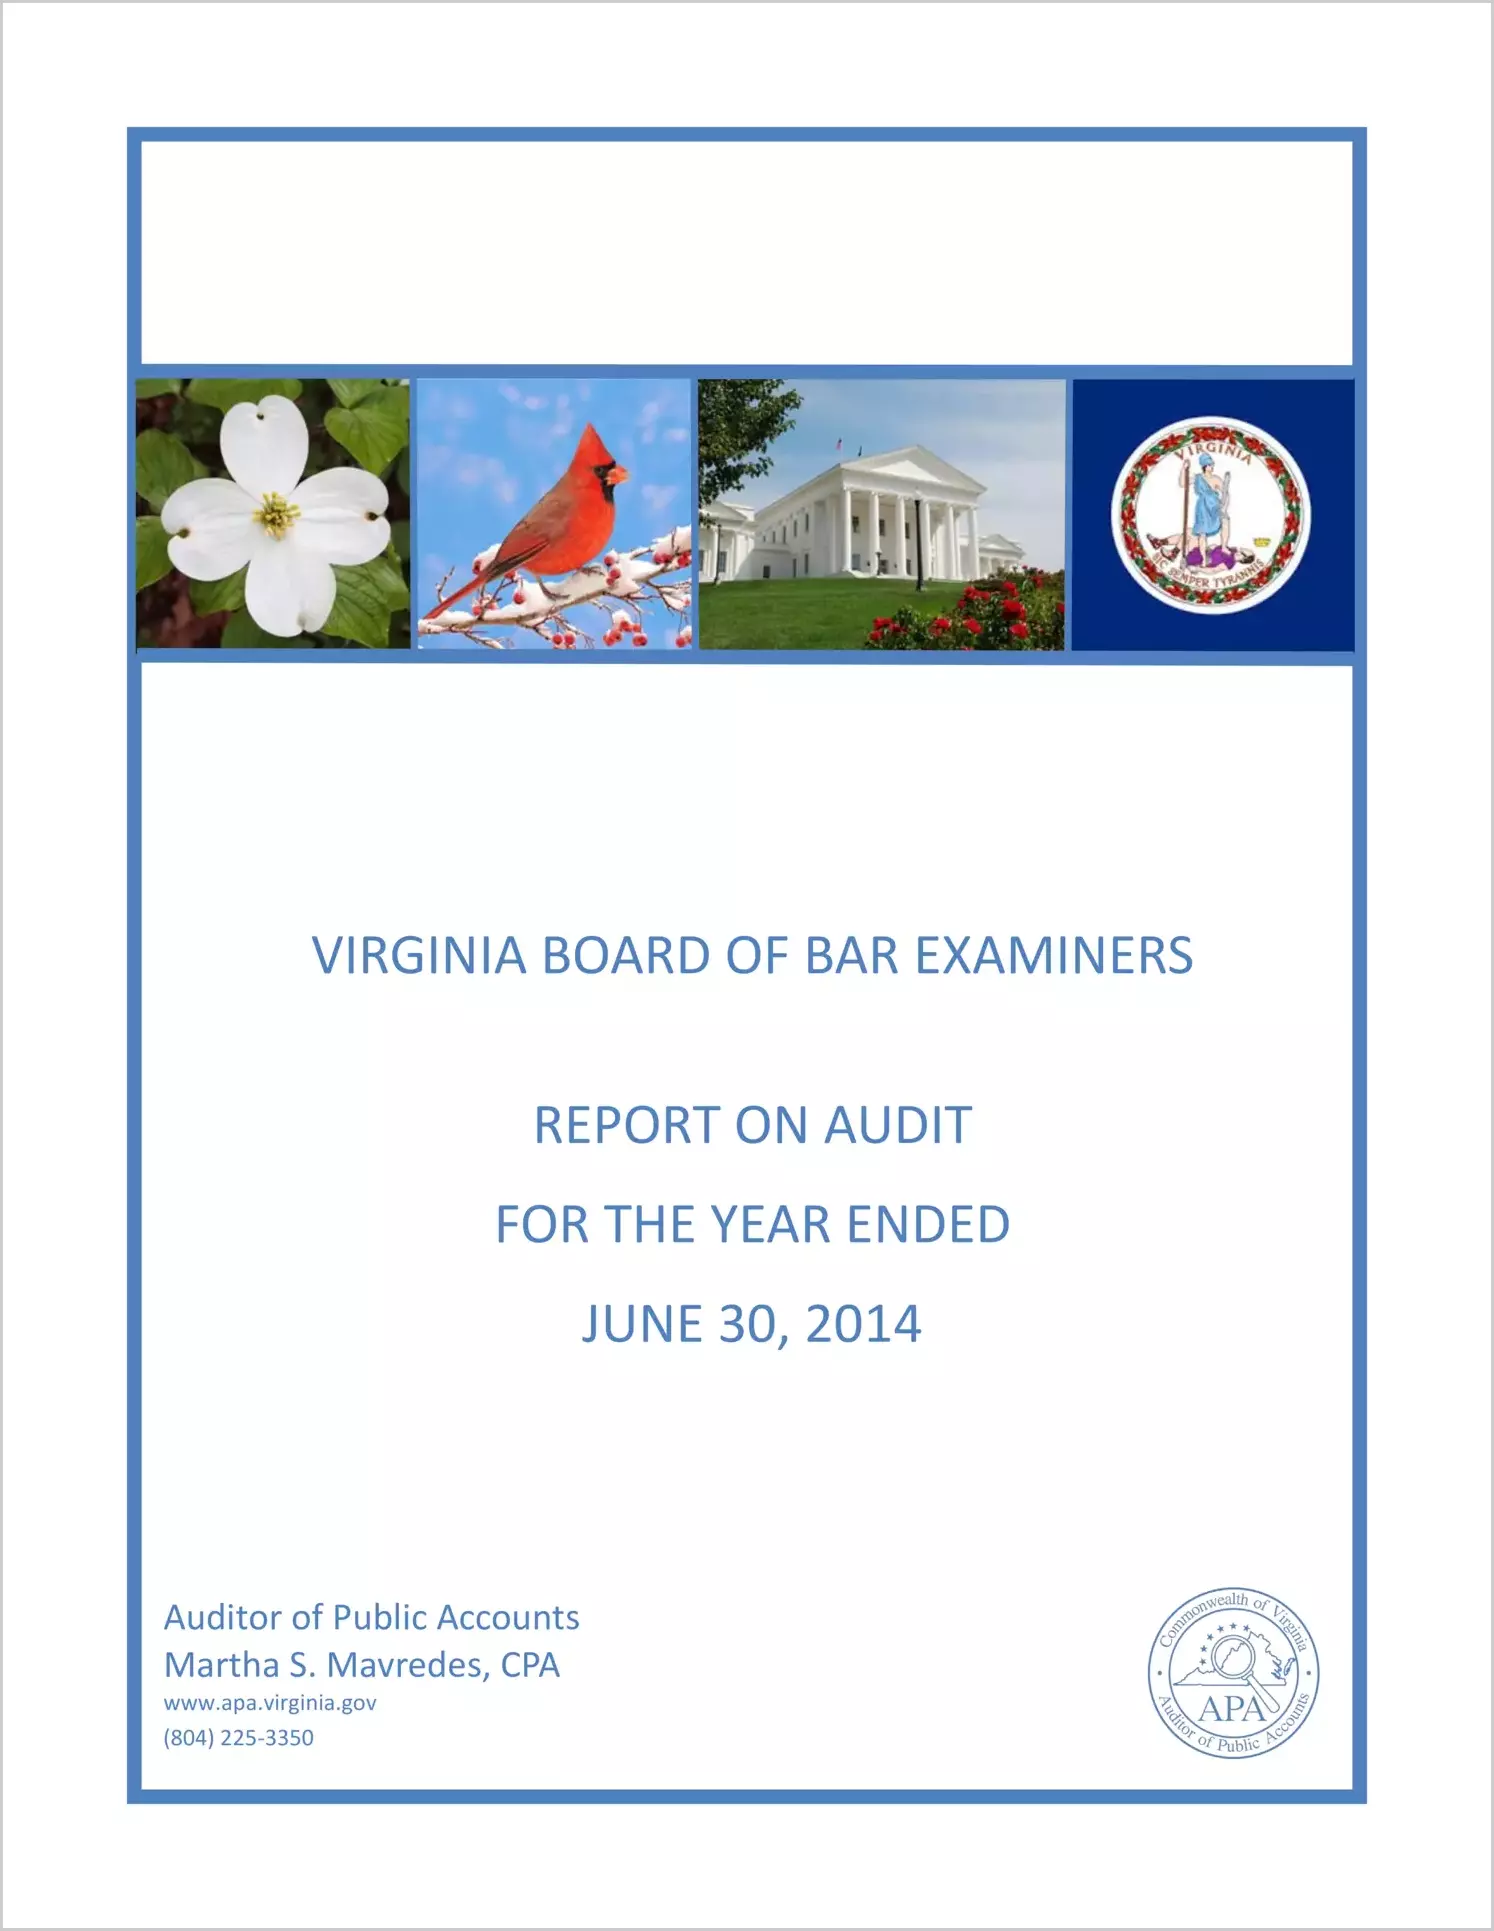 Virginia Board of Bar Examiners Report on Audit for the Year Ended June 30, 2014